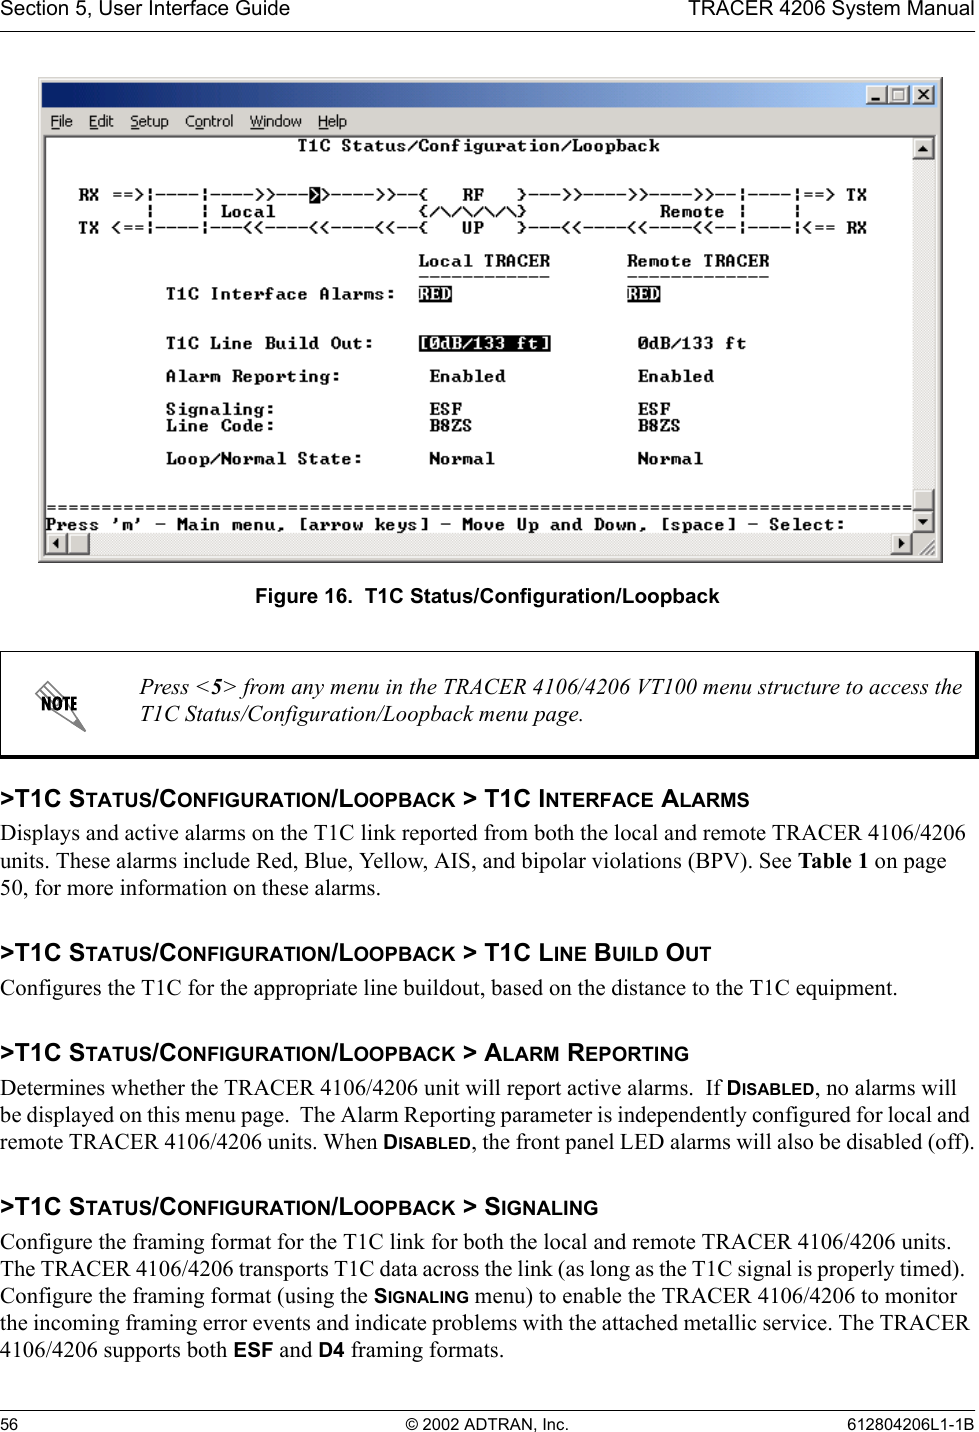 Section 5, User Interface Guide TRACER 4206 System Manual56 © 2002 ADTRAN, Inc. 612804206L1-1BFigure 16.  T1C Status/Configuration/Loopback&gt;T1C STATUS/CONFIGURATION/LOOPBACK &gt; T1C INTERFACE ALARMSDisplays and active alarms on the T1C link reported from both the local and remote TRACER 4106/4206 units. These alarms include Red, Blue, Yellow, AIS, and bipolar violations (BPV). See Table 1 on page 50, for more information on these alarms.&gt;T1C STATUS/CONFIGURATION/LOOPBACK &gt; T1C LINE BUILD OUTConfigures the T1C for the appropriate line buildout, based on the distance to the T1C equipment. &gt;T1C STATUS/CONFIGURATION/LOOPBACK &gt; ALARM REPORTINGDetermines whether the TRACER 4106/4206 unit will report active alarms.  If DISABLED, no alarms will be displayed on this menu page.  The Alarm Reporting parameter is independently configured for local and remote TRACER 4106/4206 units. When DISABLED, the front panel LED alarms will also be disabled (off).&gt;T1C STATUS/CONFIGURATION/LOOPBACK &gt; SIGNALINGConfigure the framing format for the T1C link for both the local and remote TRACER 4106/4206 units.  The TRACER 4106/4206 transports T1C data across the link (as long as the T1C signal is properly timed).  Configure the framing format (using the SIGNALING menu) to enable the TRACER 4106/4206 to monitor the incoming framing error events and indicate problems with the attached metallic service. The TRACER 4106/4206 supports both ESF and D4 framing formats.Press &lt;5&gt; from any menu in the TRACER 4106/4206 VT100 menu structure to access the T1C Status/Configuration/Loopback menu page.